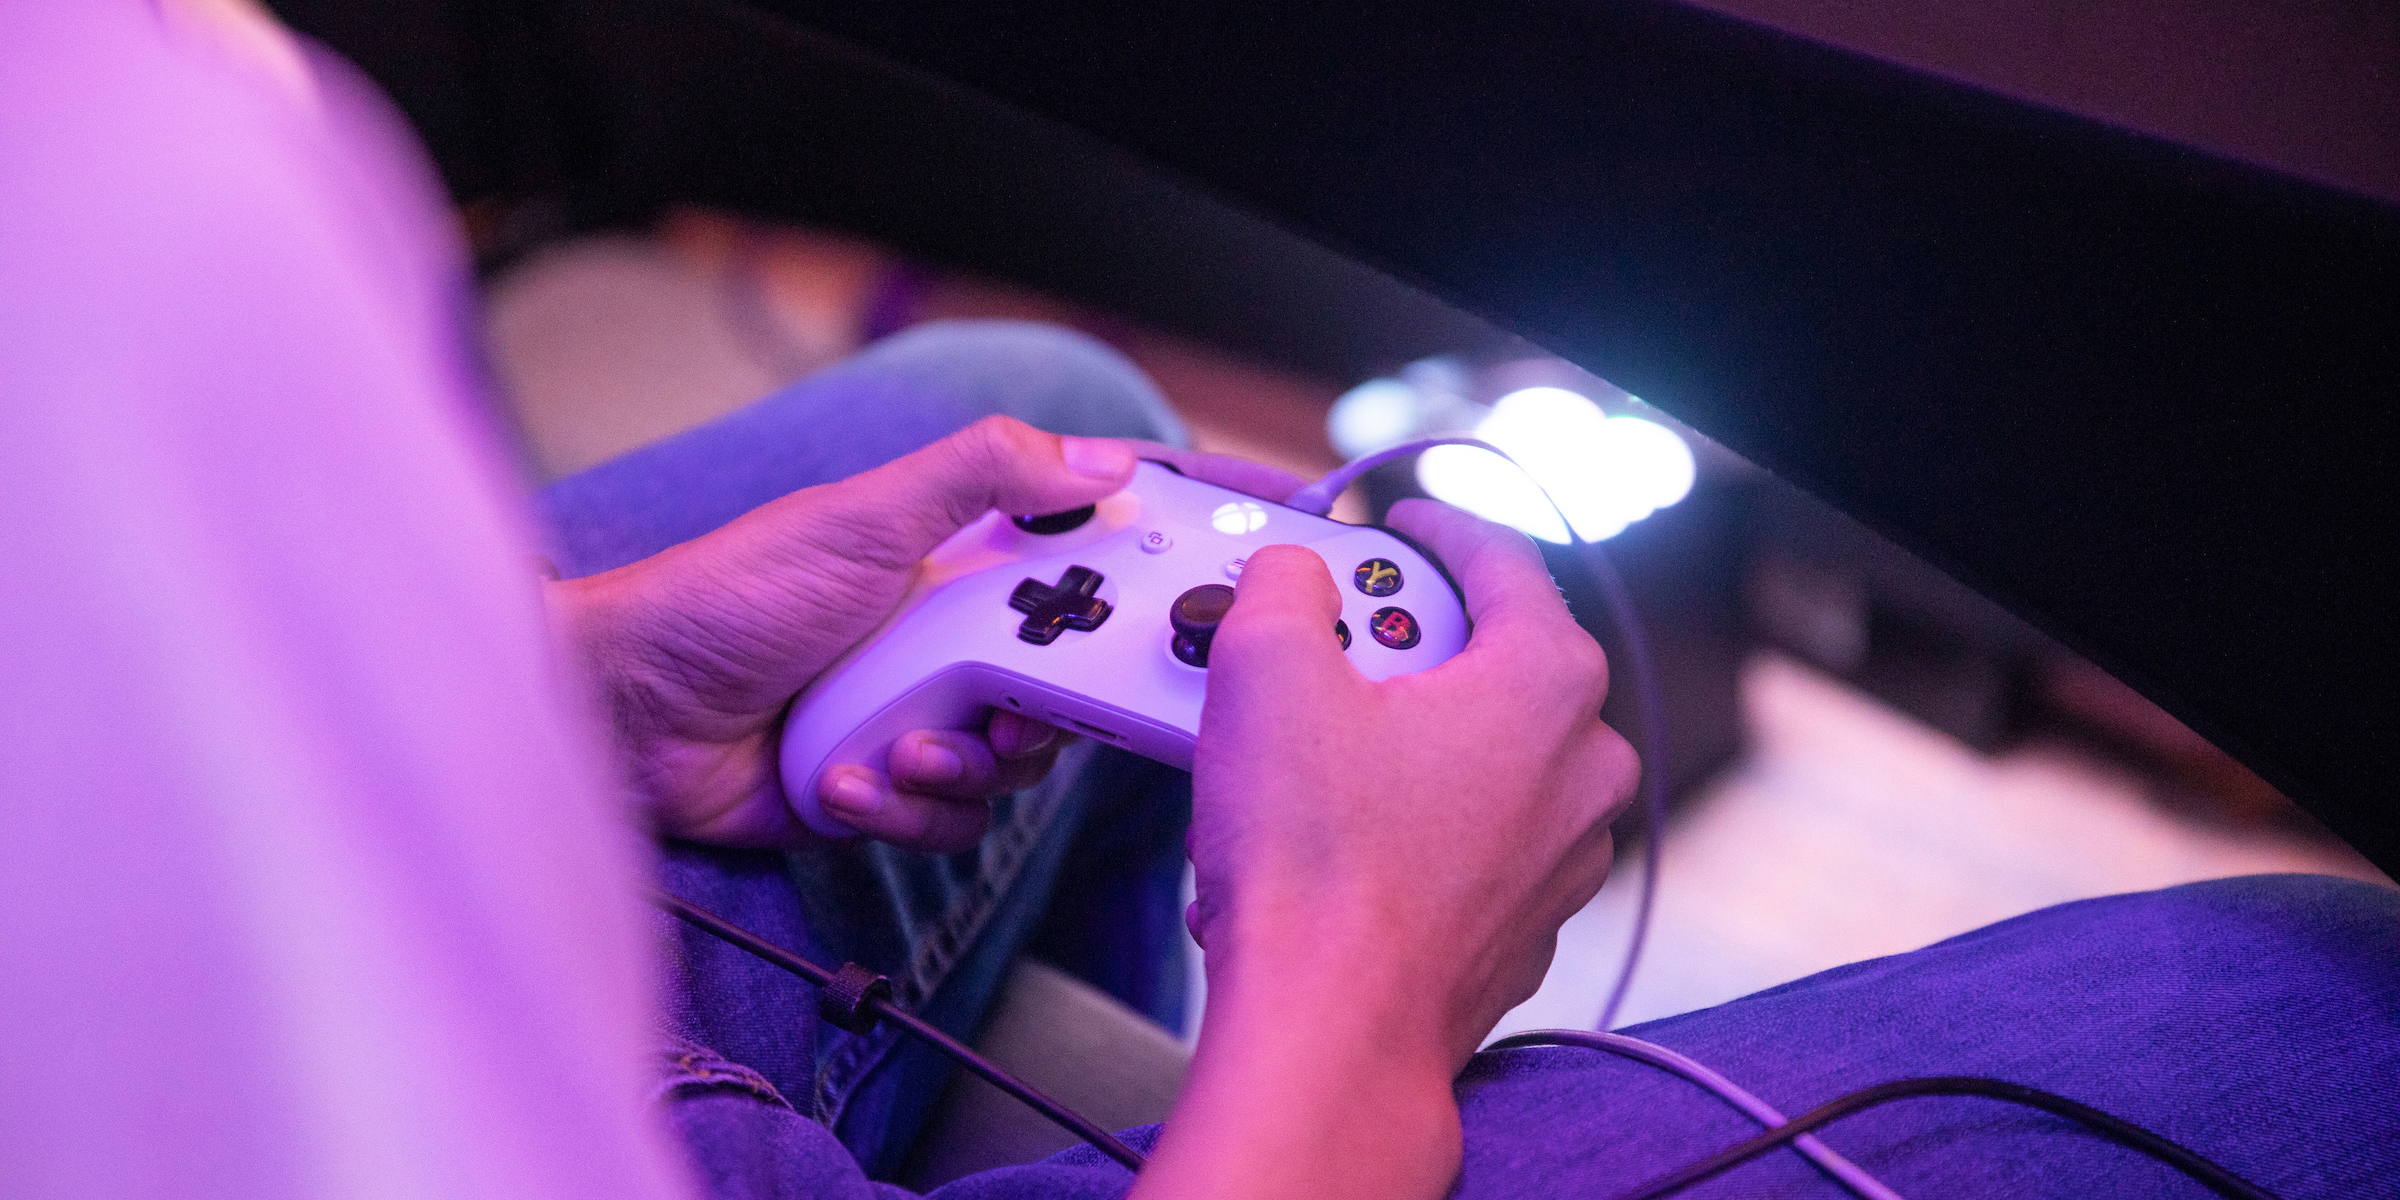 A student grips an Xbox One controller while playing during tournament.